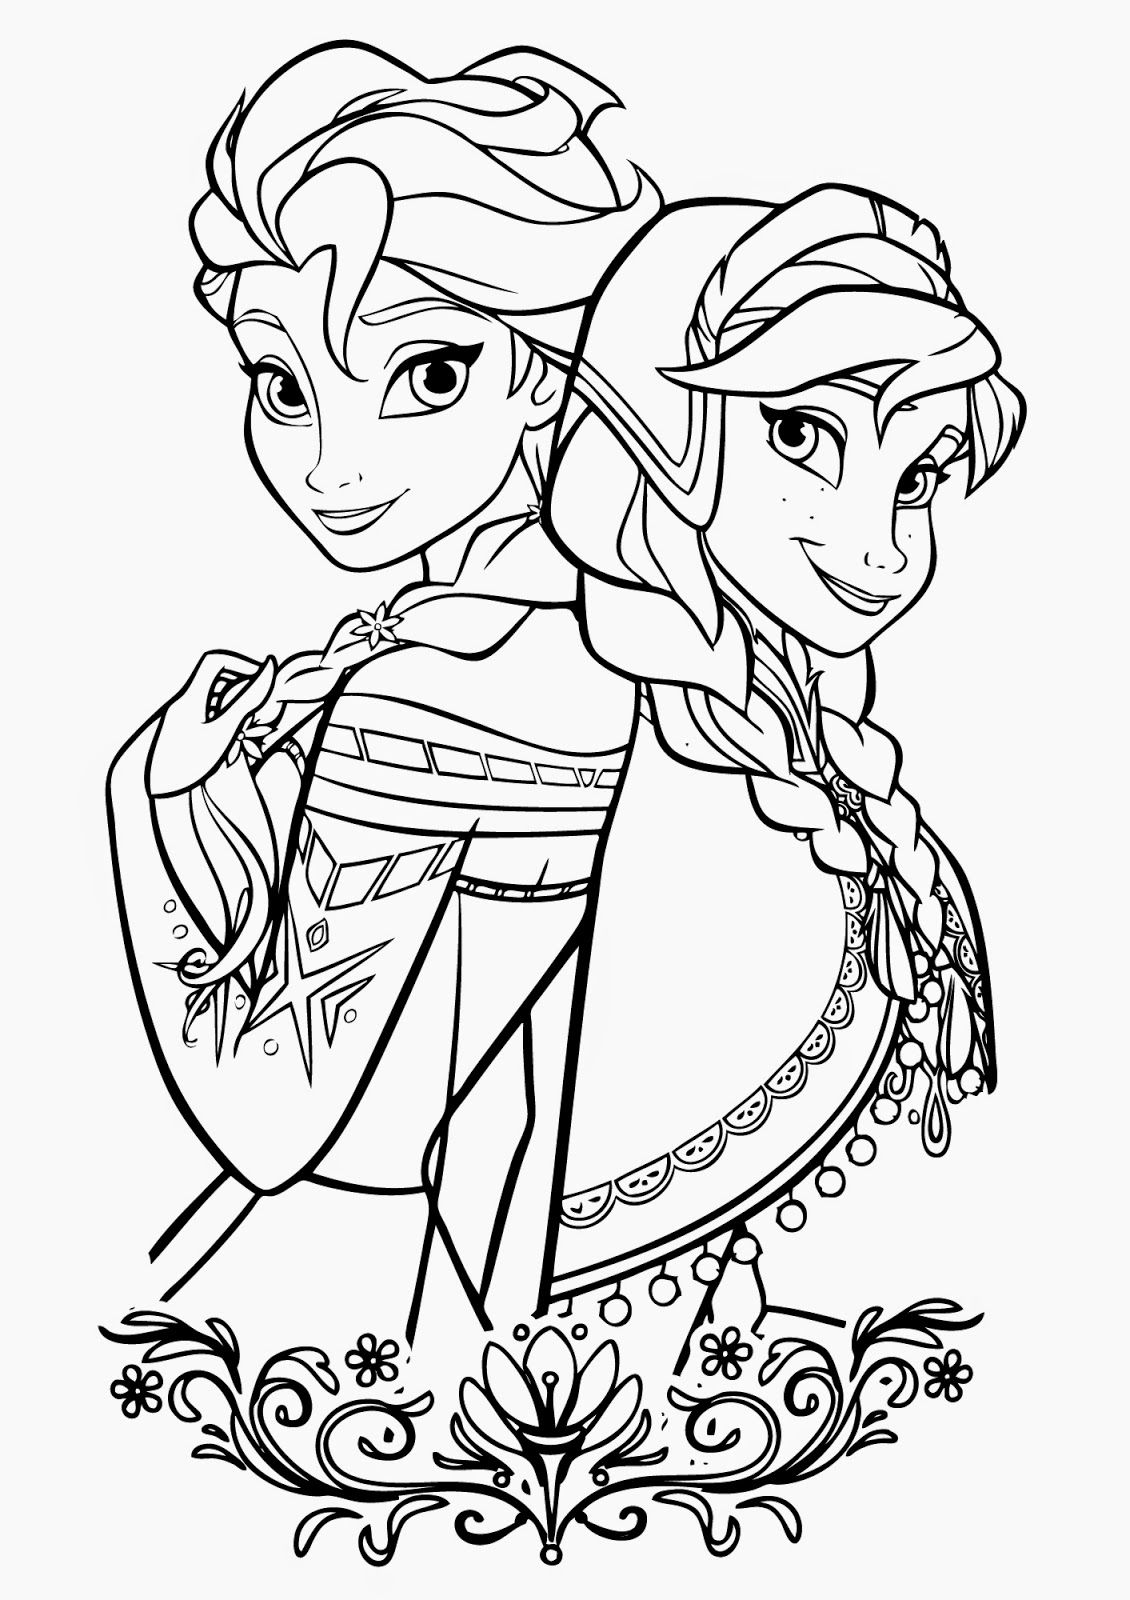 Elsa And Anna Coloring Pages - Coloring Home